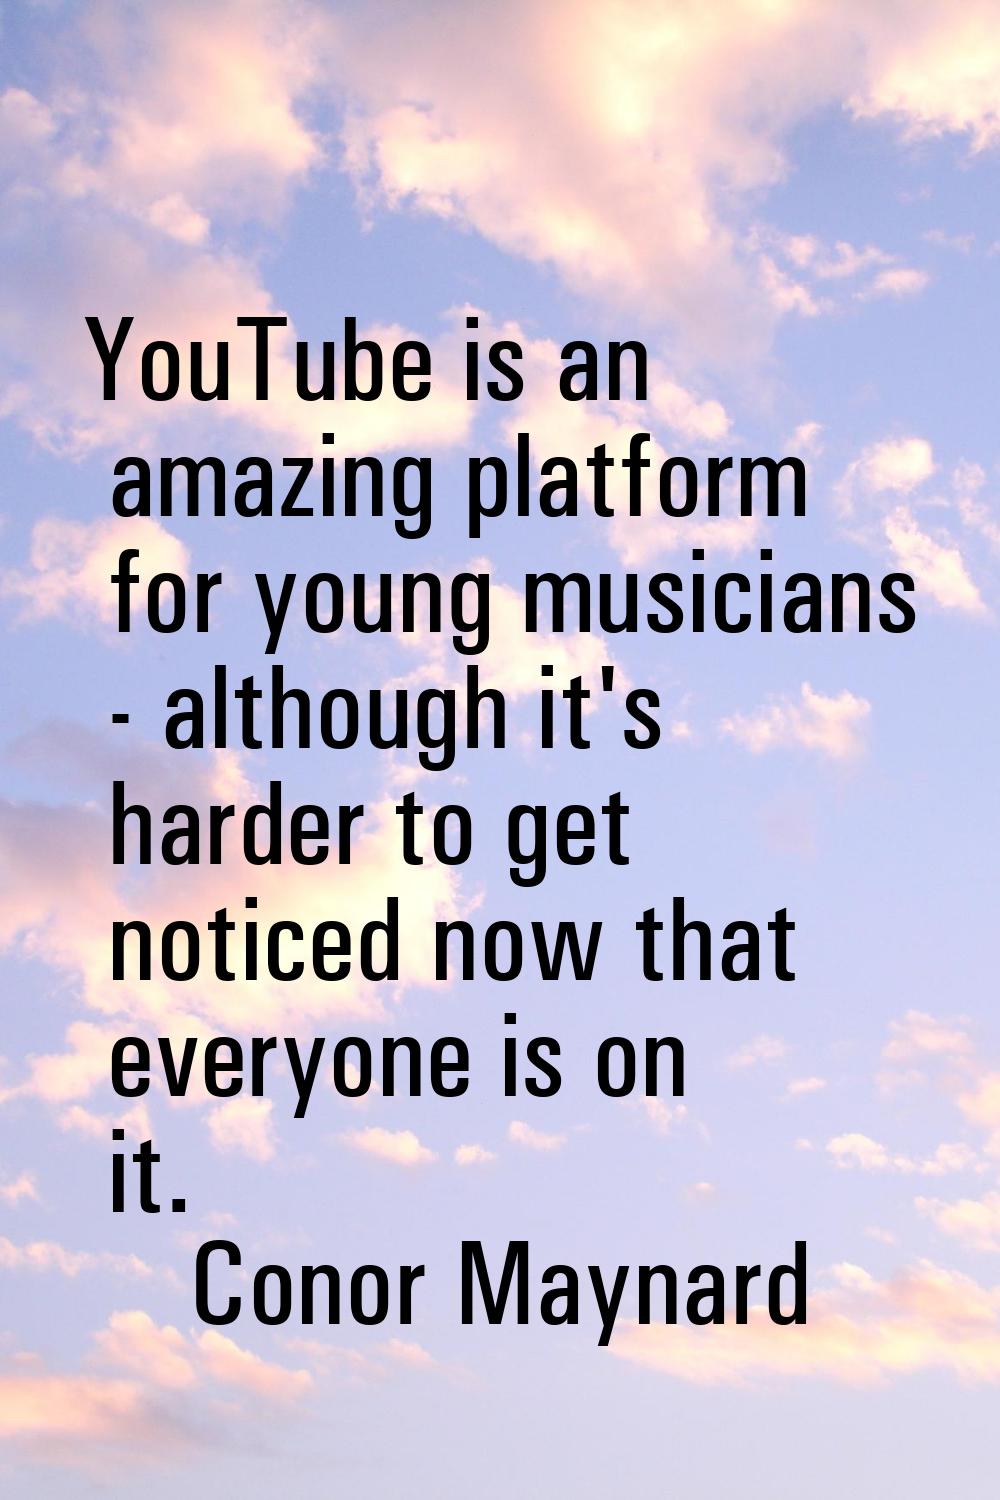 YouTube is an amazing platform for young musicians - although it's harder to get noticed now that e